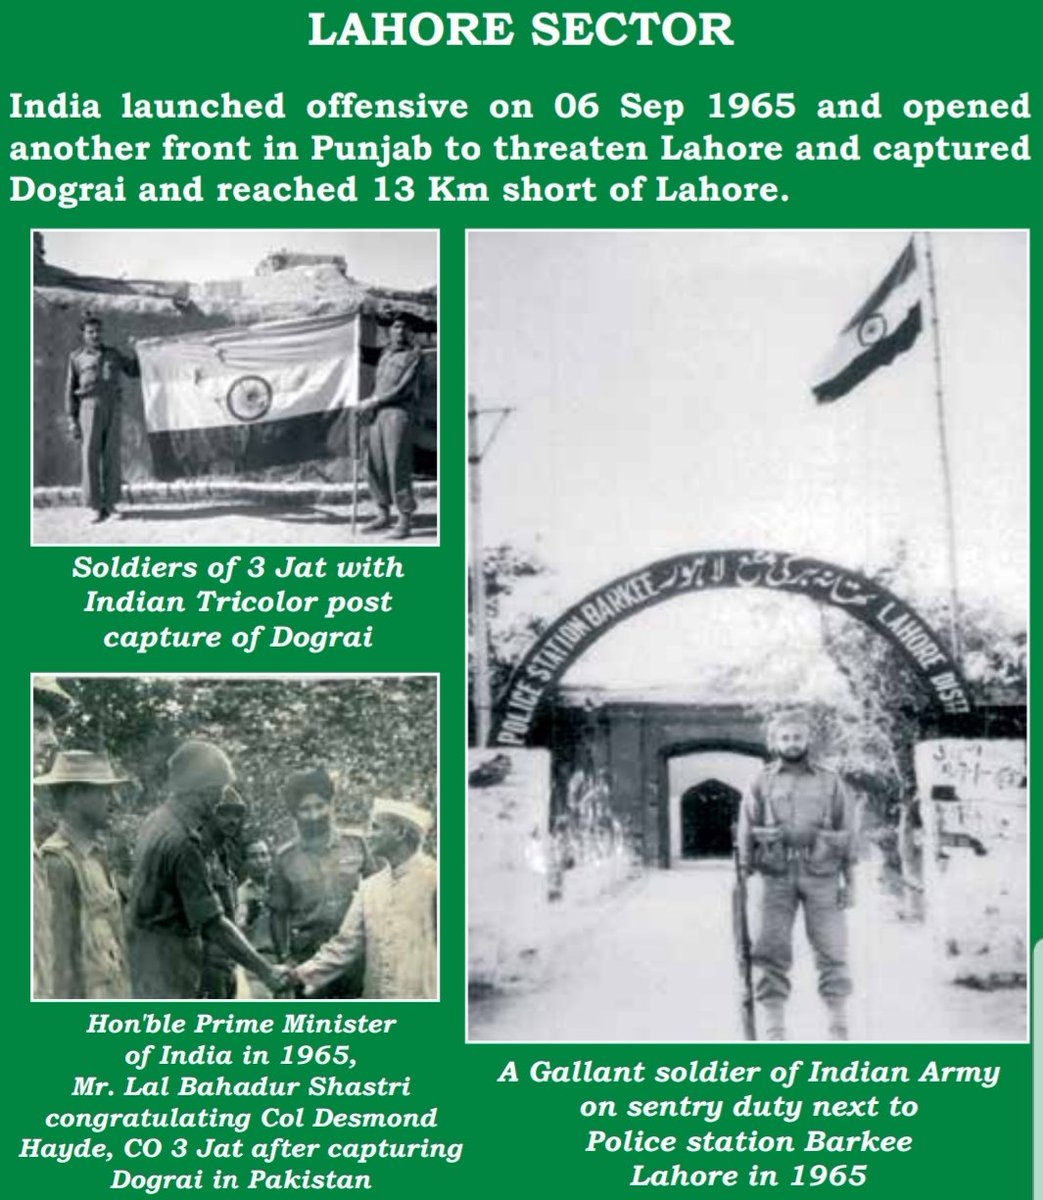 #Remembering1965 The glorious legend scripted by the amazing #IndianArmy 🇮🇳